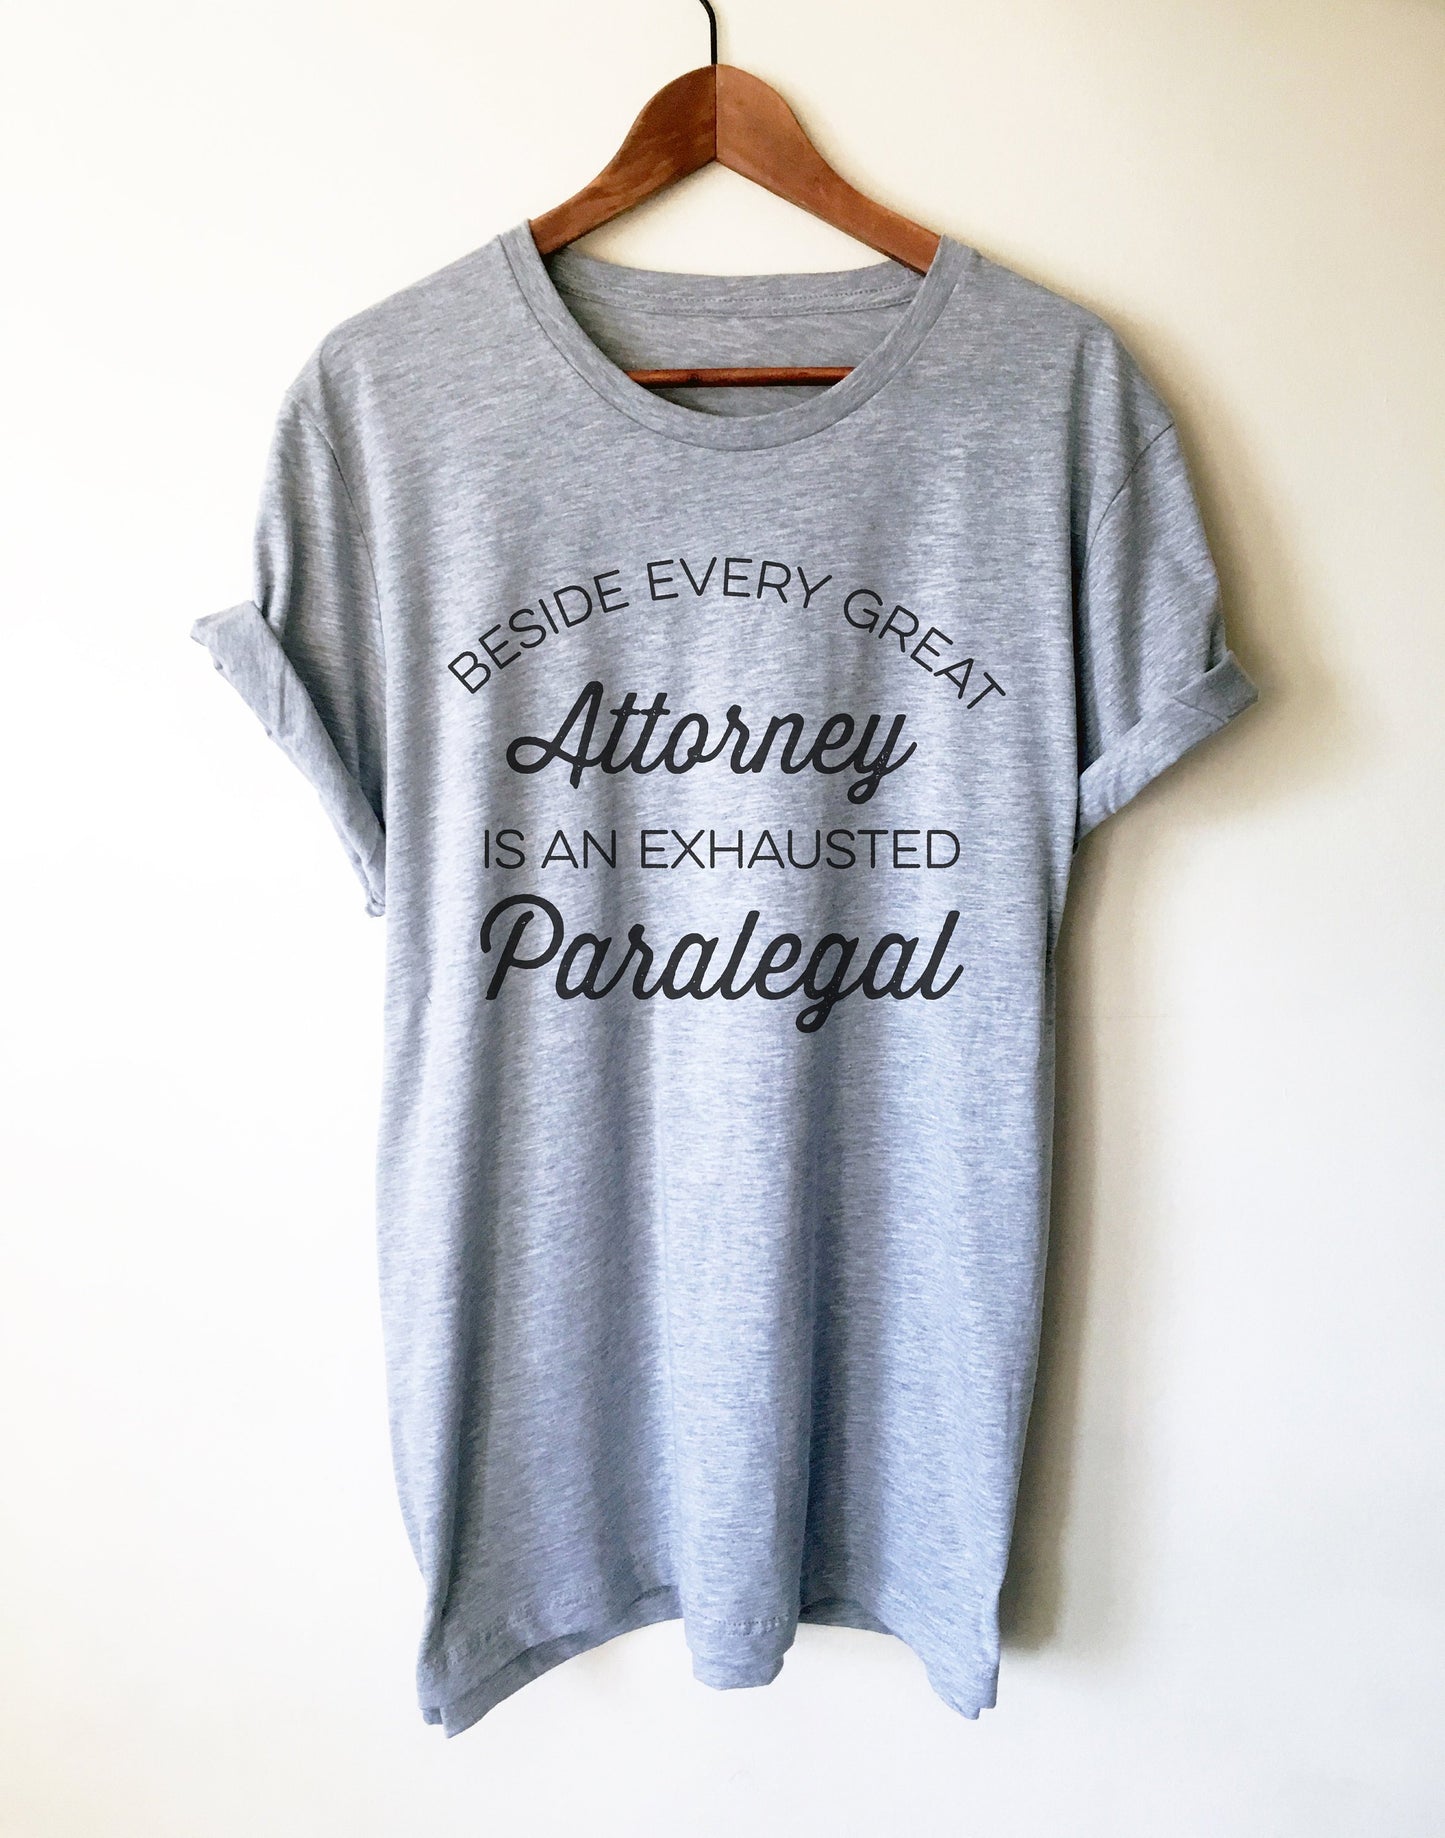 Beside Every Great Attorney Is An Exhausted Paralegal Unisex Shirt